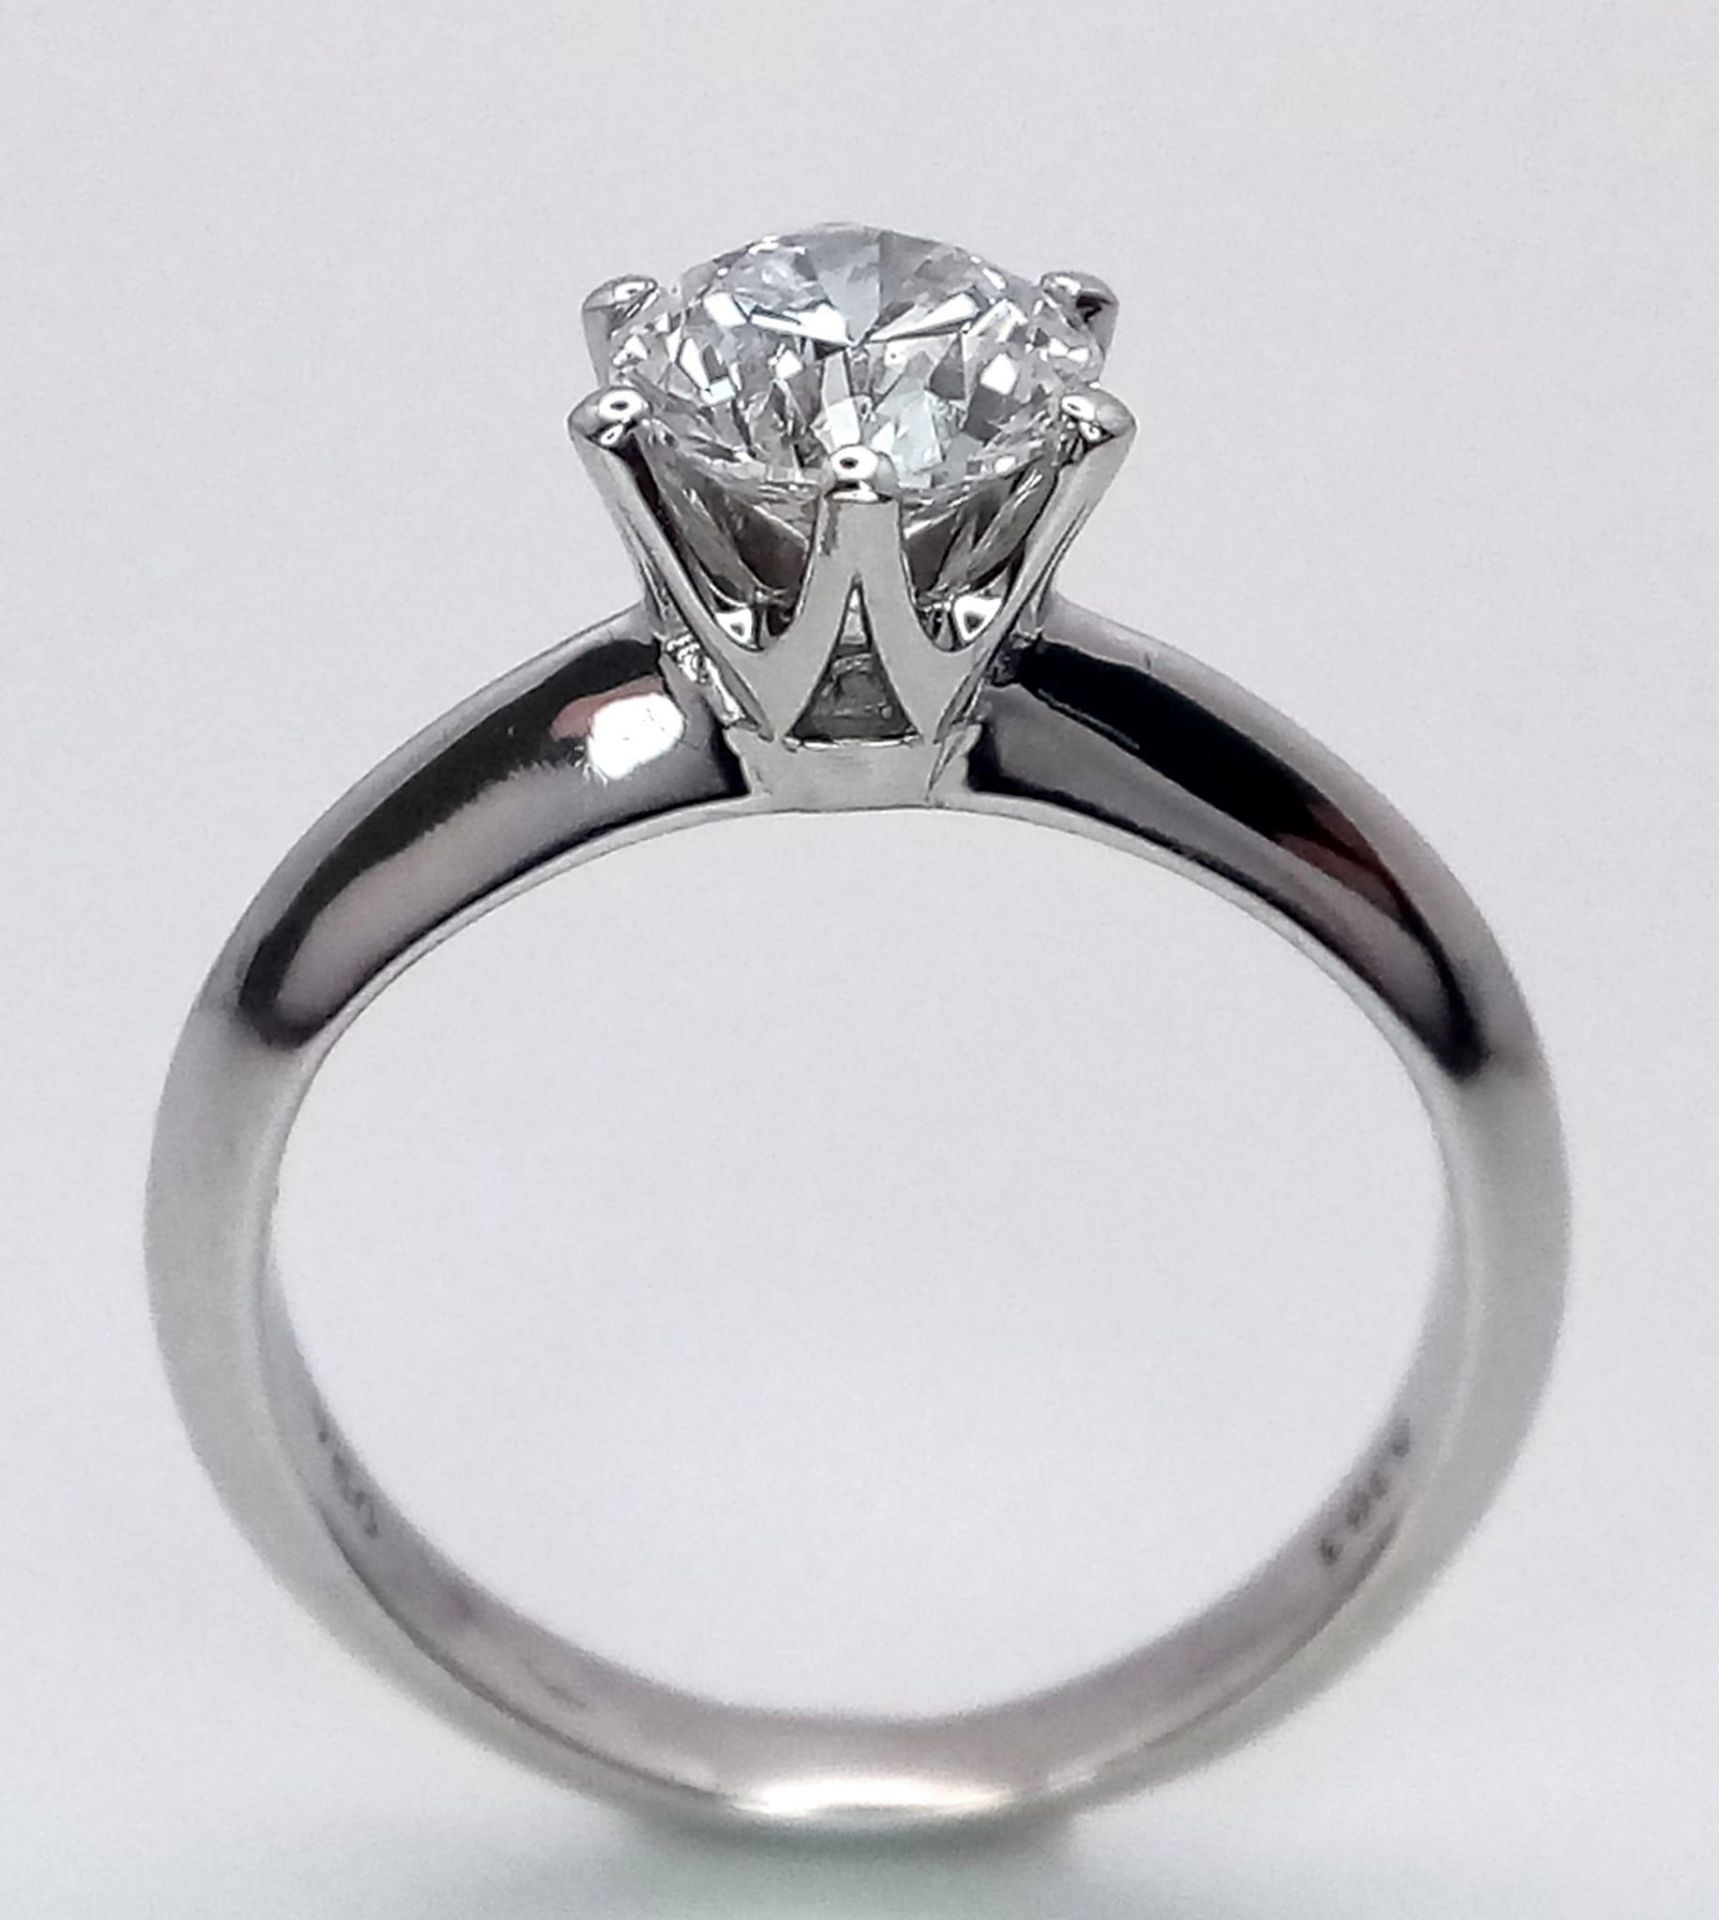 An 18K white Gold 1ct Diamond Solitaire Ring. Brilliant round cut diamond. Comes with an IGI - Image 5 of 9